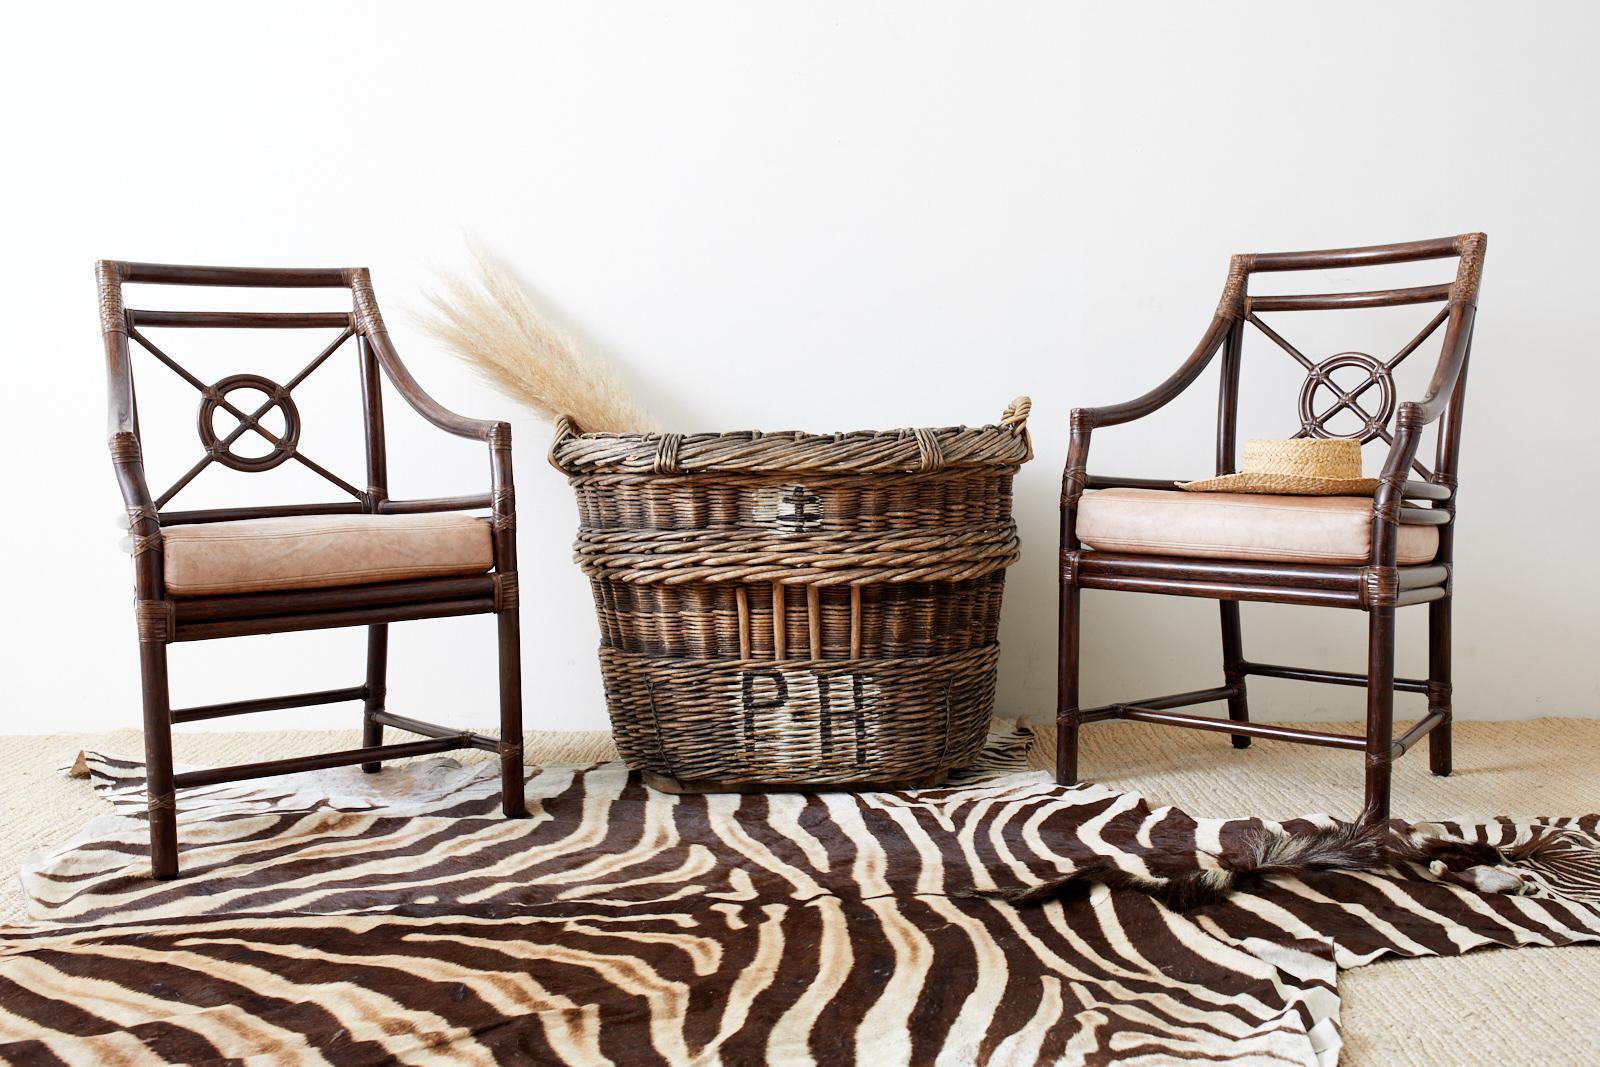 Classic set of four genuine McGuire target design armchairs or dining chairs. Designed by Elinor McGuire the frame features the famous target motif on the backsplat. Handcrafted bamboo rattan frame lashed together with leather rawhide laces.